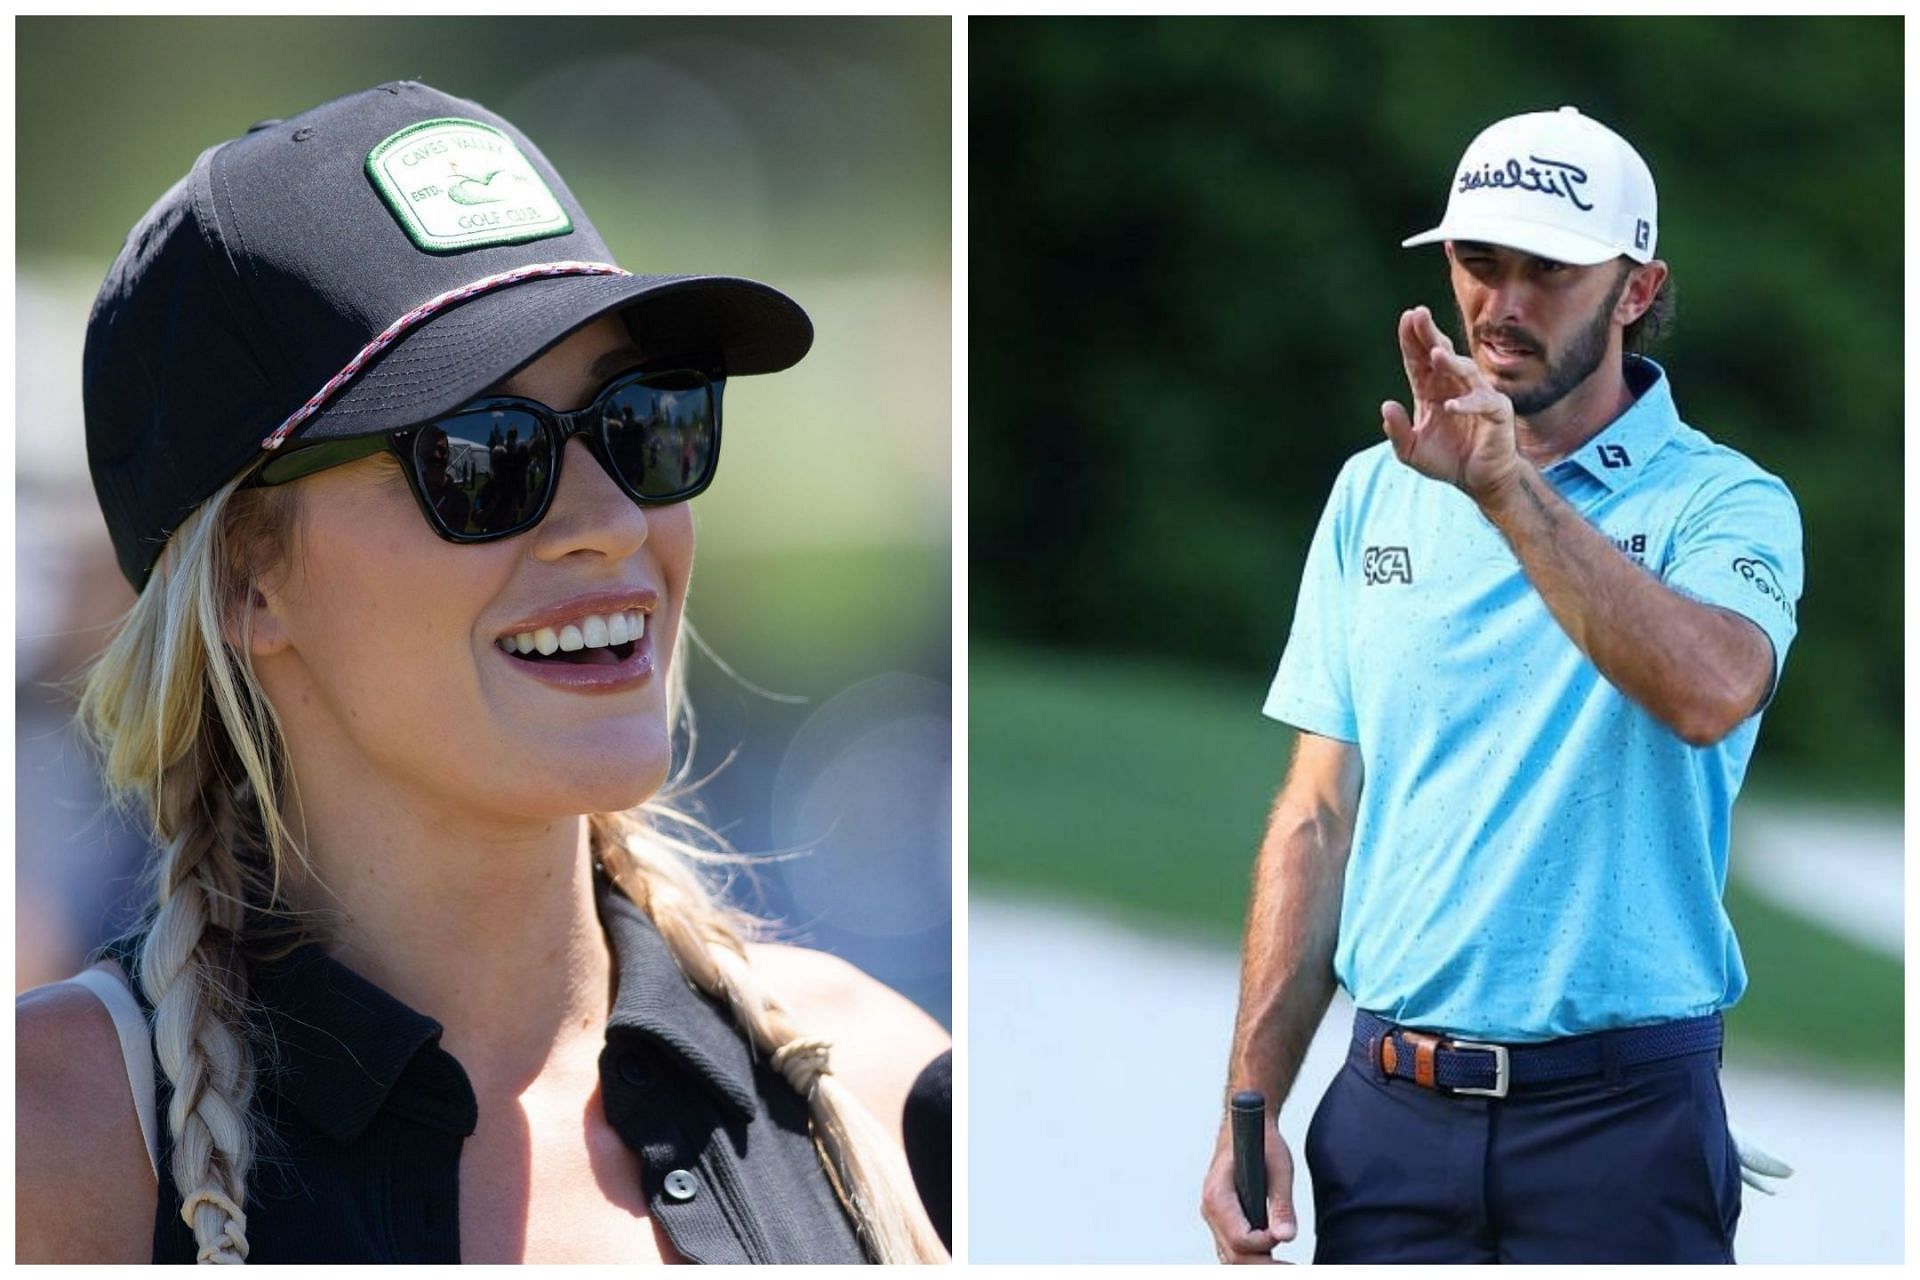 Paige Spiranac shares encouraging words for Max Homa after hsi Masters loss